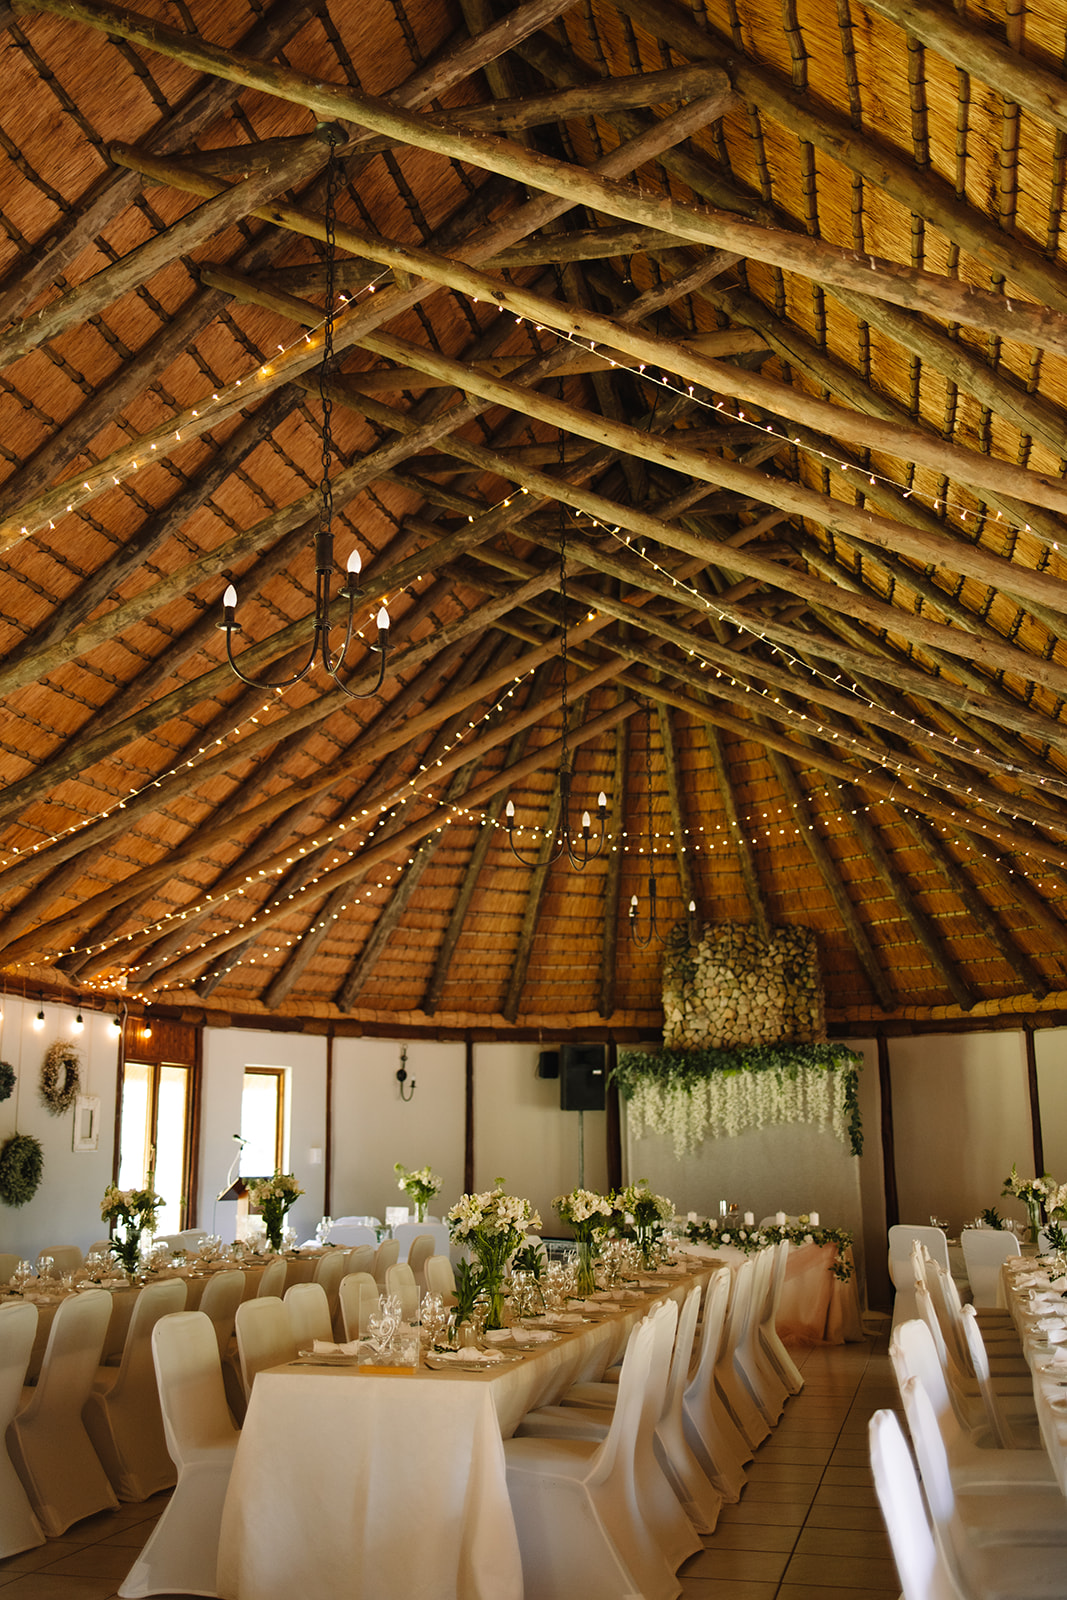 Interior of a rustic event hall with high wooden beam ceiling, decorated with fairy lights and chandeliers, set up for a wedding reception with white draped tables at a wedding in Minnesota 